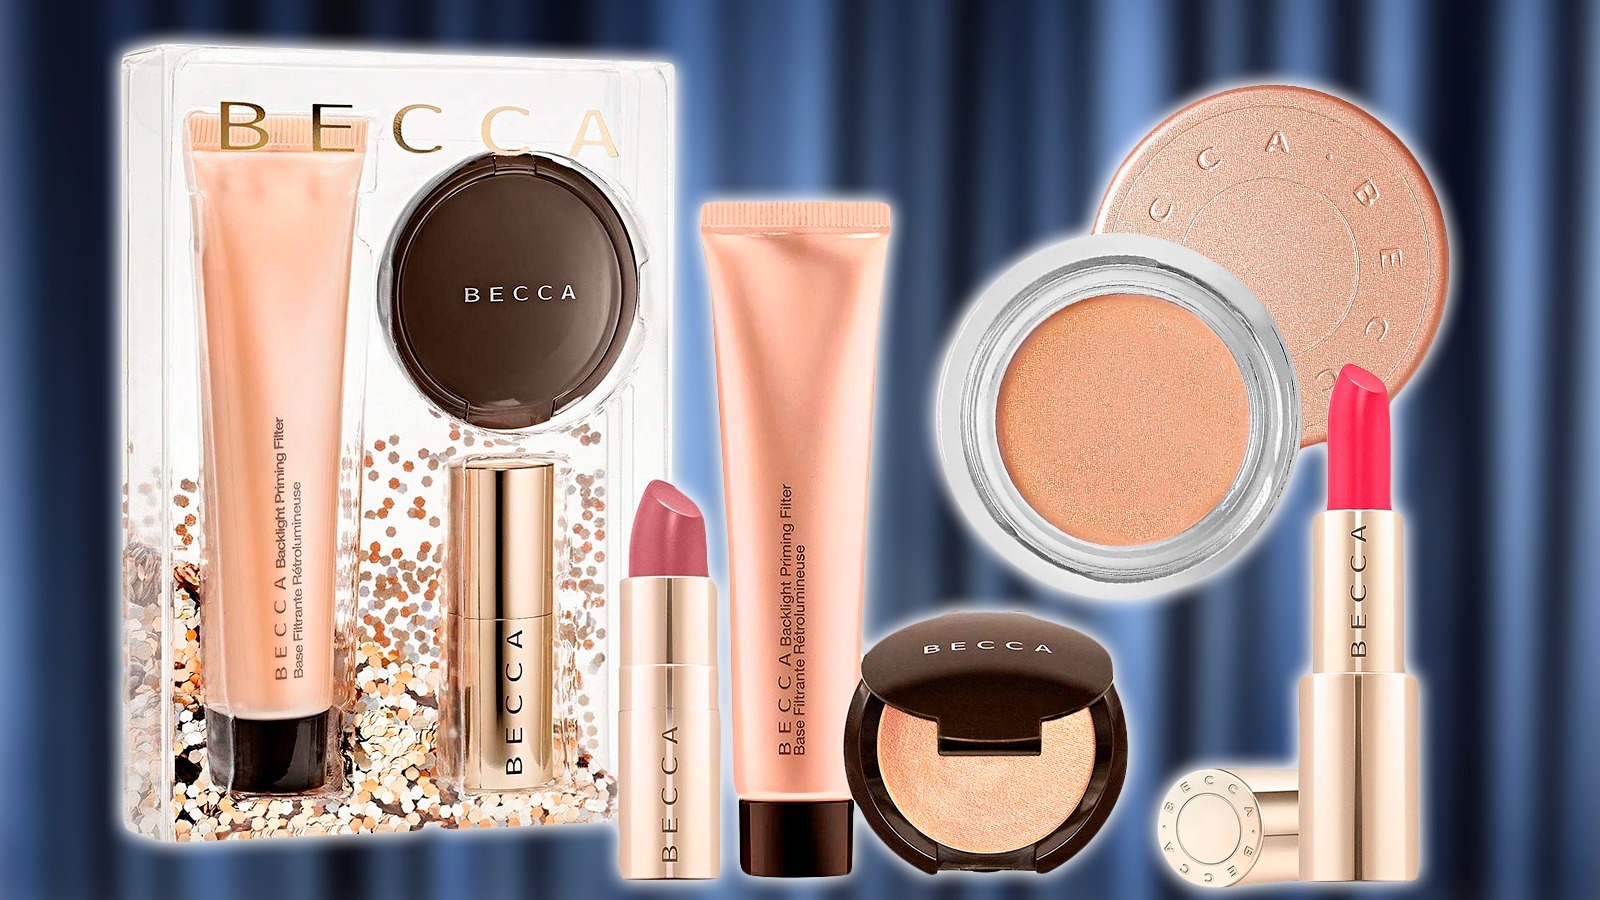 “Becca Cosmetics Your Secret to Effortless Glamour”